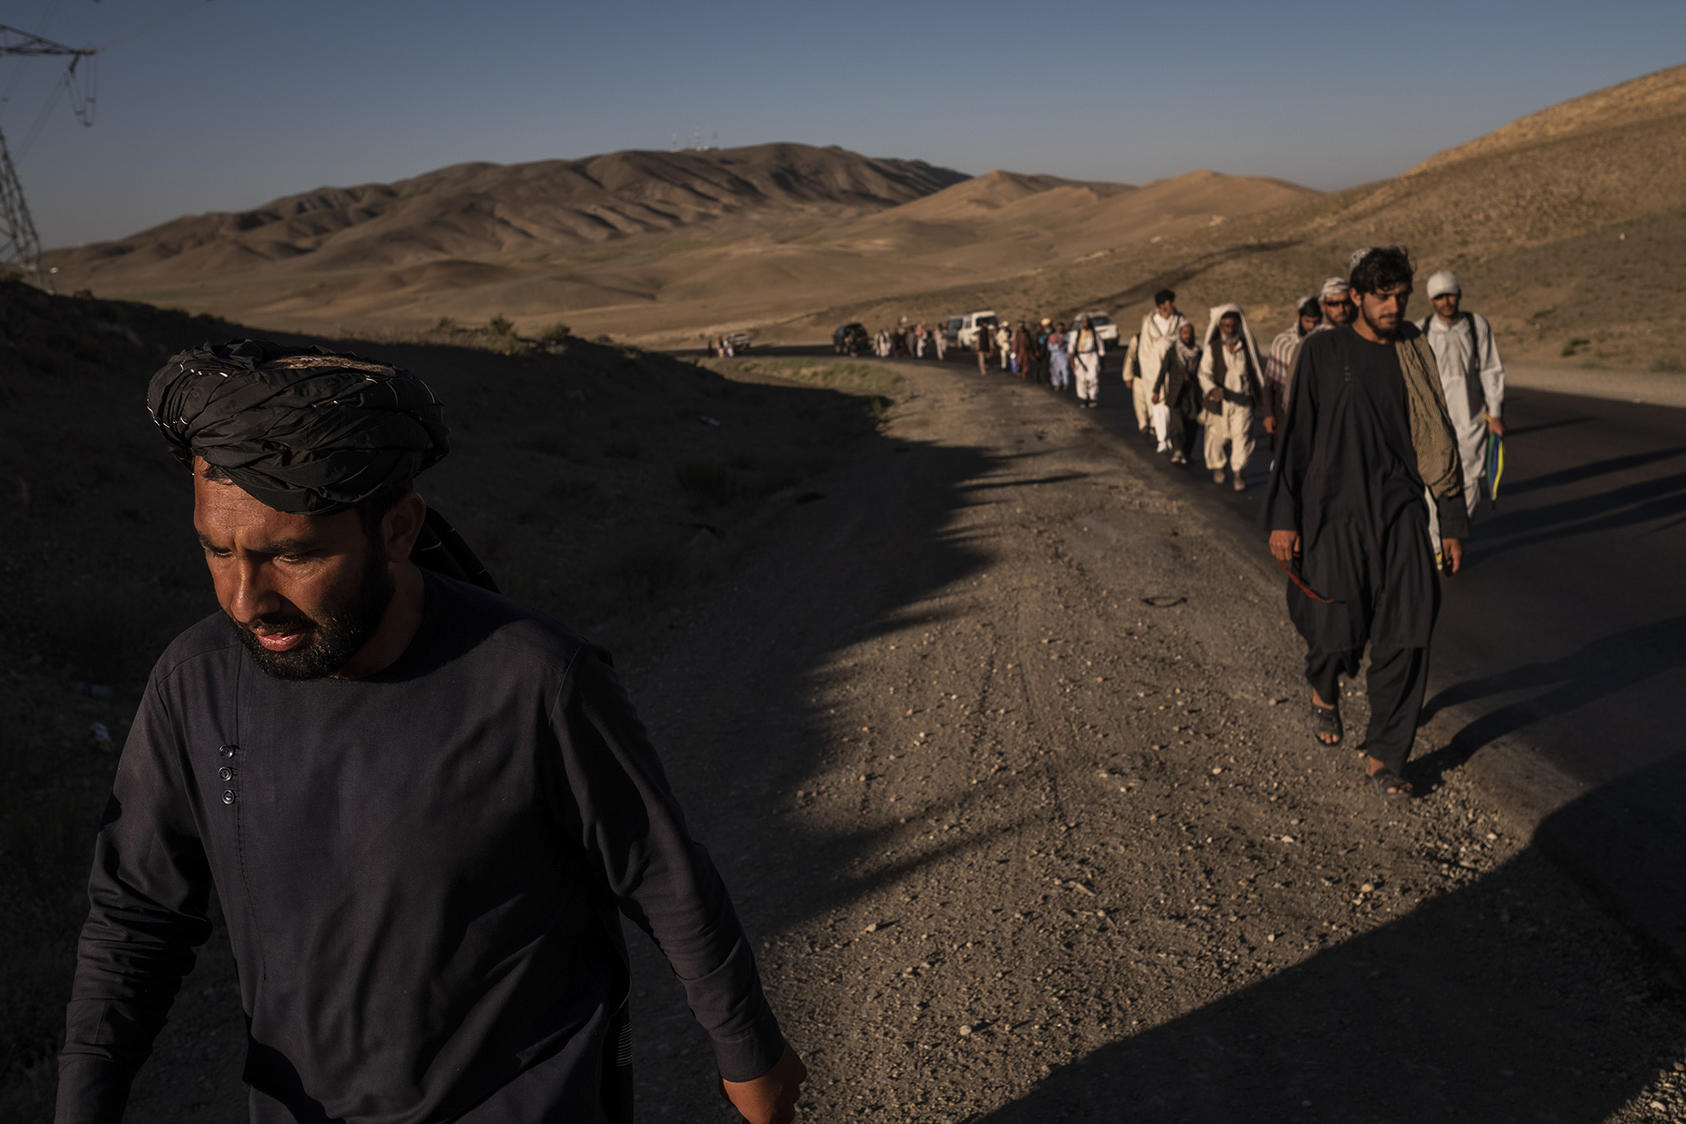 Citizens’ peace marches, here in Wardak province in 2018, have underscored Afghans’ longing to end 40 years of war—a step for which they have pressed both the Taliban and government, even as civilian losses have risen. (Jim Huylebroek/The New York Times)